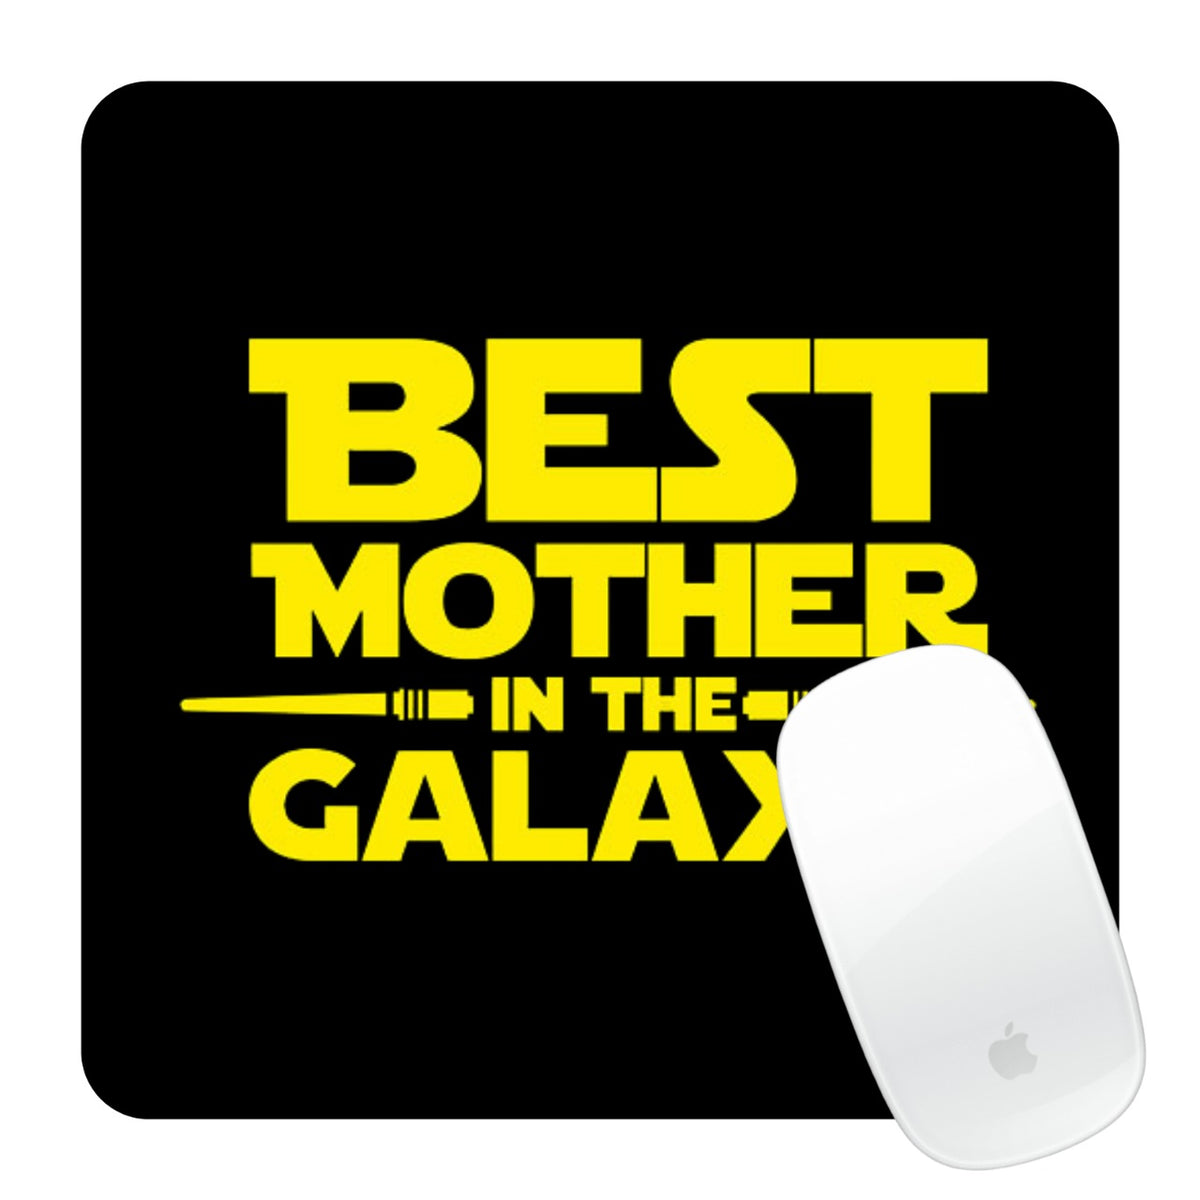 MOUSE PAD BEST MOTHER GALAXY